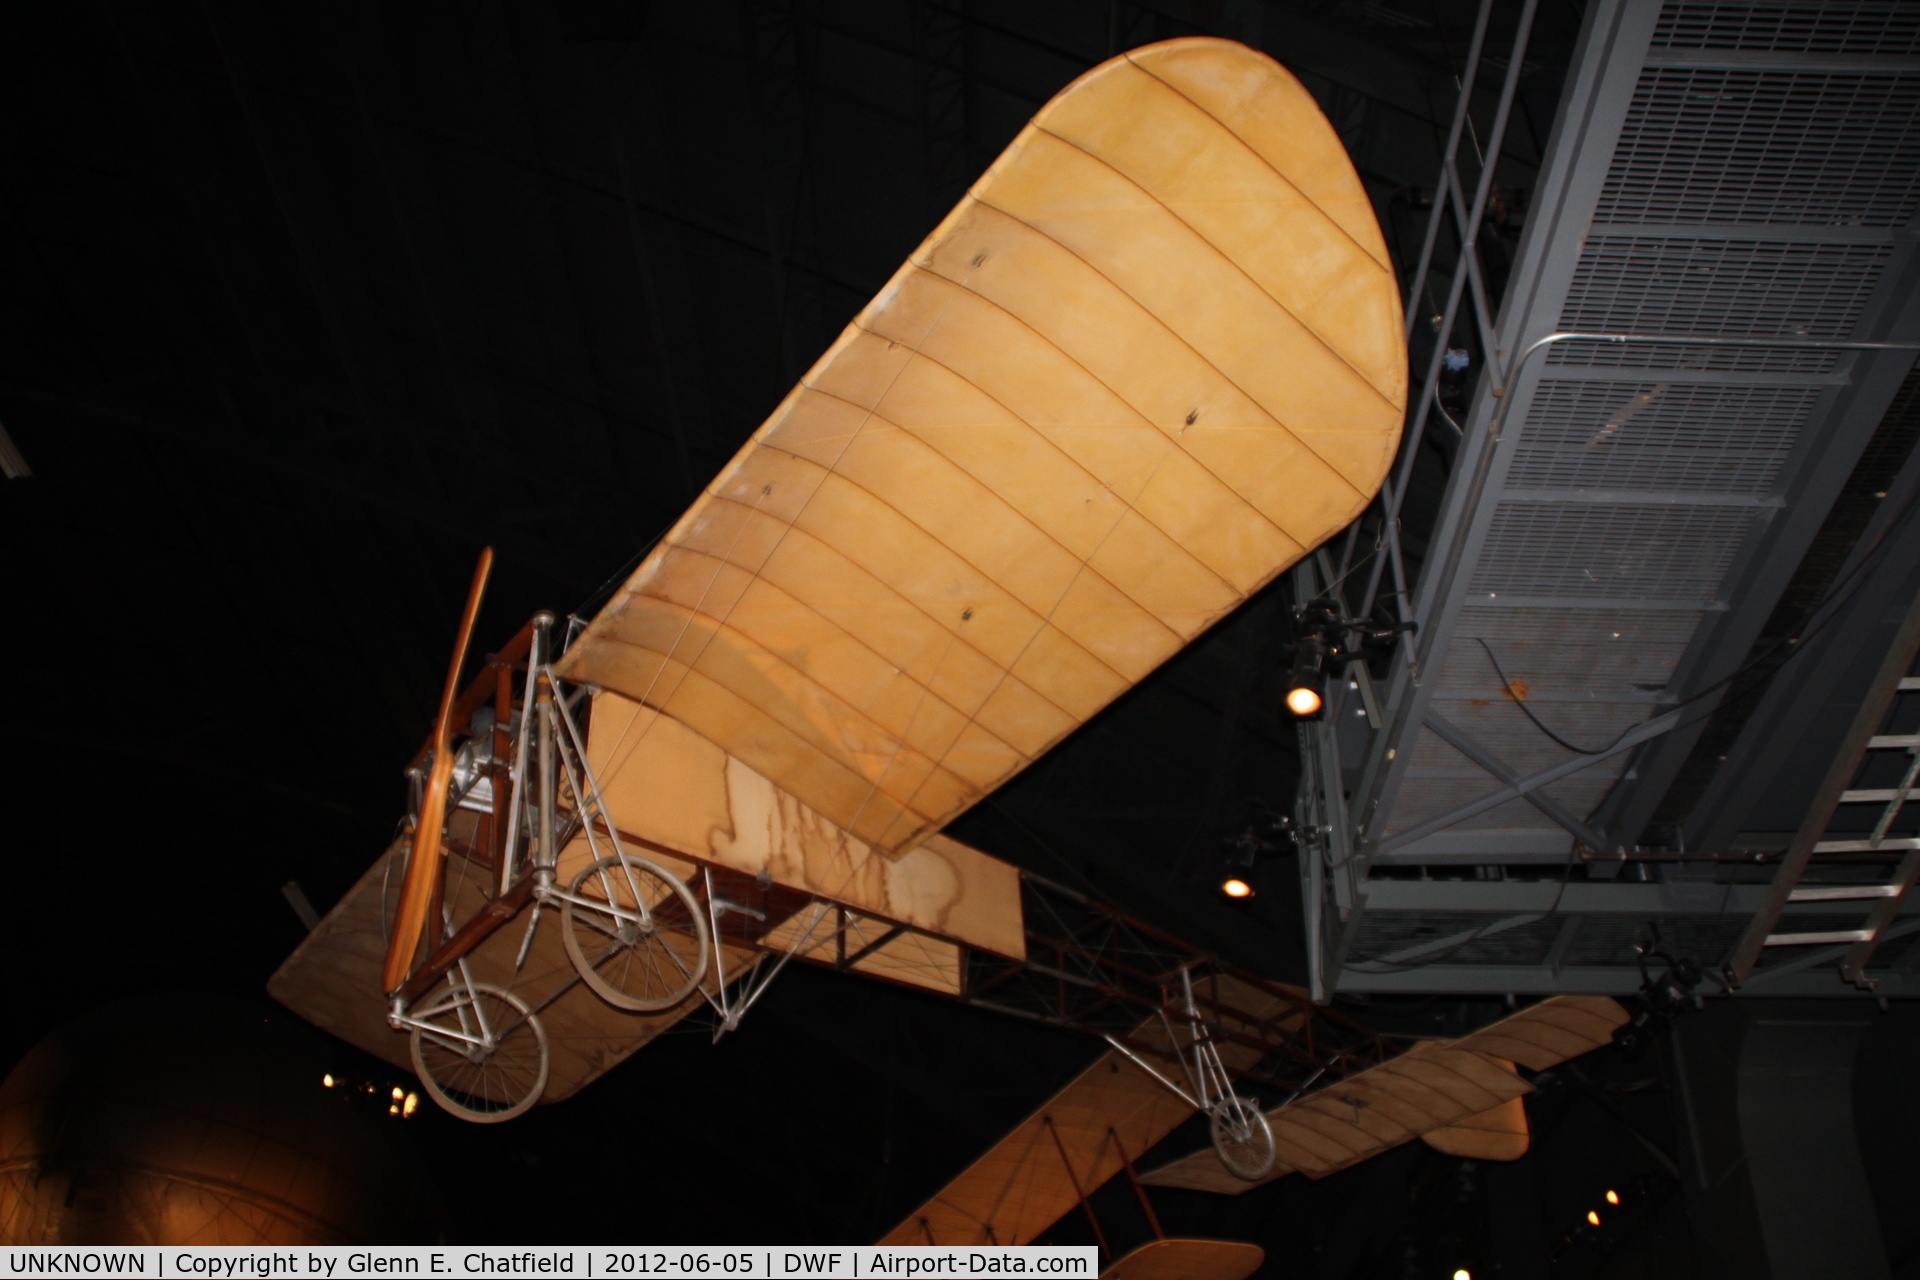 UNKNOWN, 1911 Bleriot XI 1909 Replica C/N unknown, At the National Museum of the U.S.A.F.